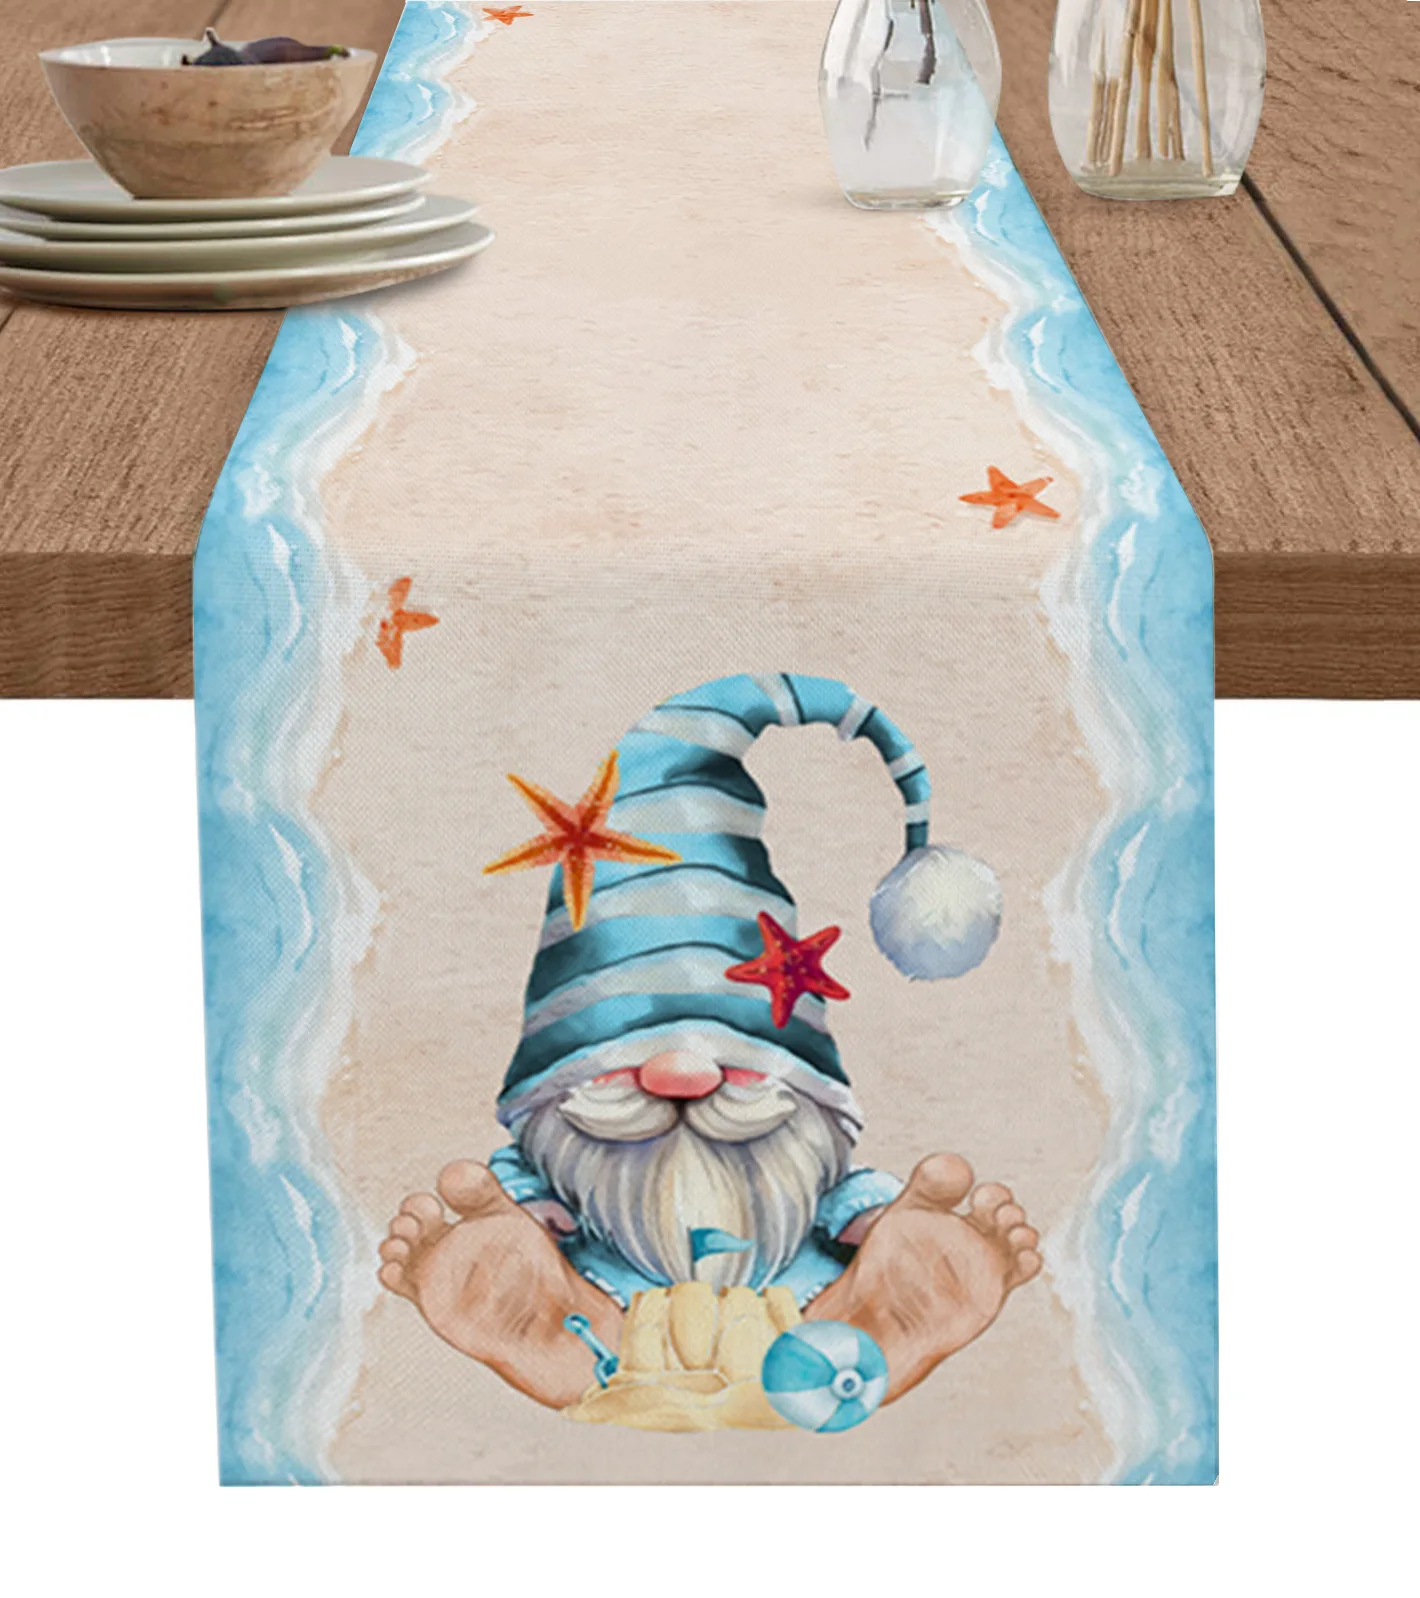 

Gnome Summer Beach Starfish Table Runner Cotton Linen Wedding Decor Table Runner for Dining Table Holiday Decor Tablecloth